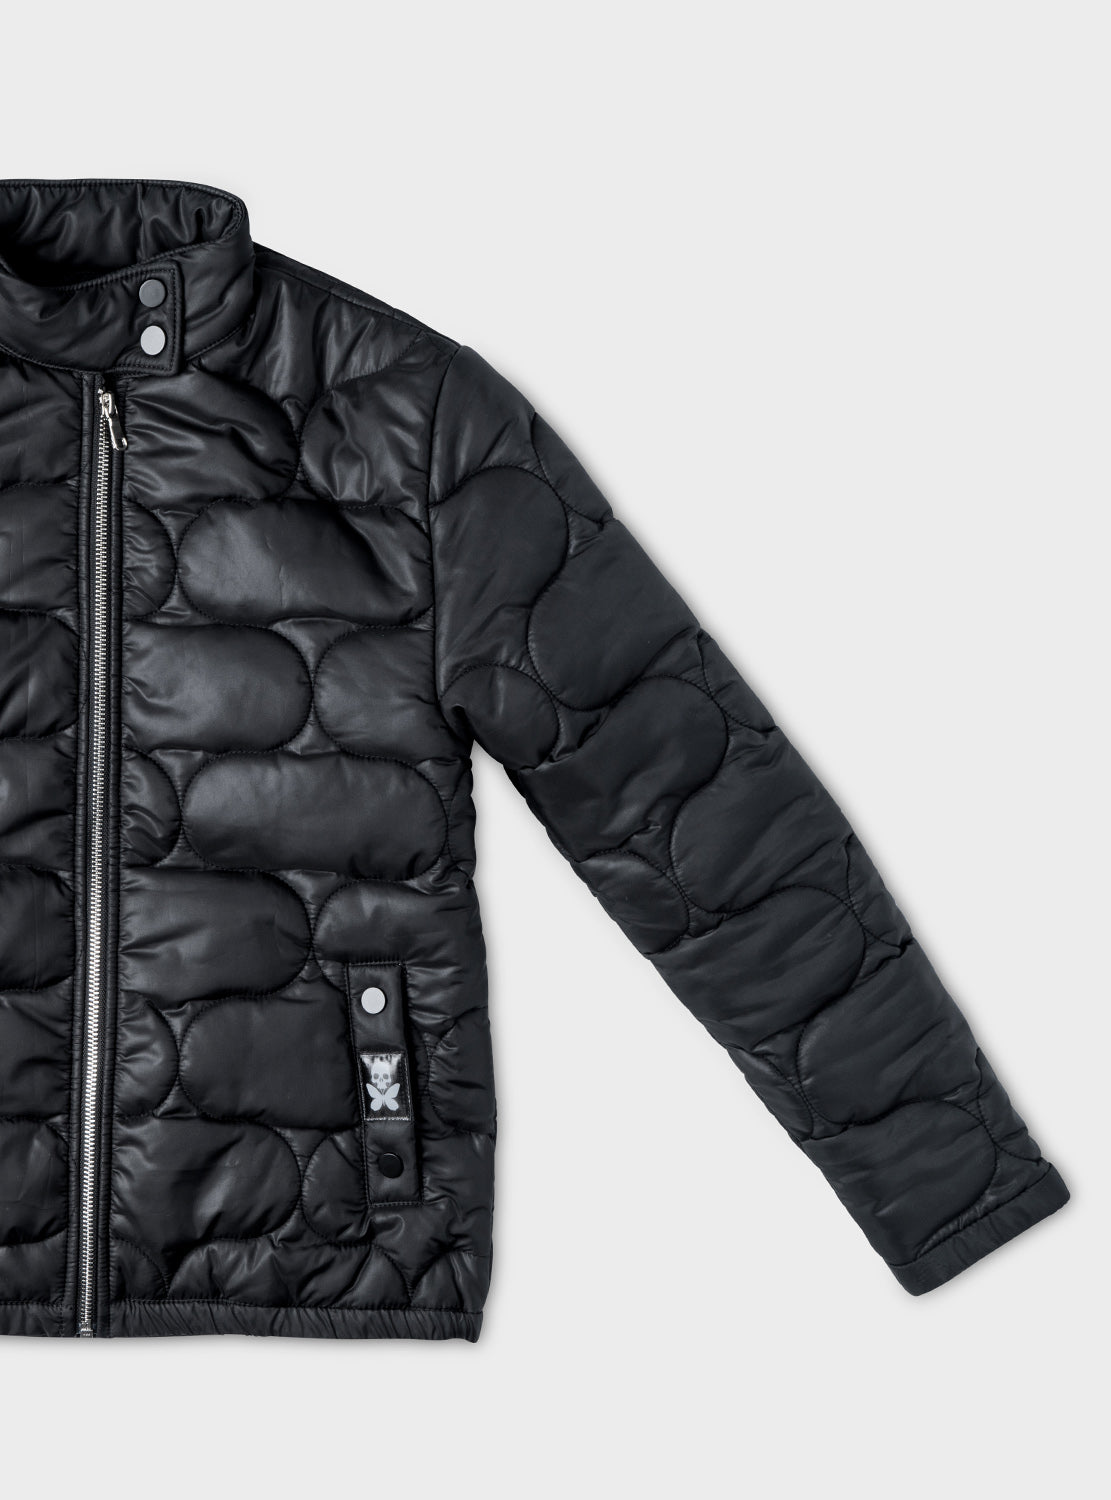 betty designs bdlab sportswear for women quilted bomber jacket